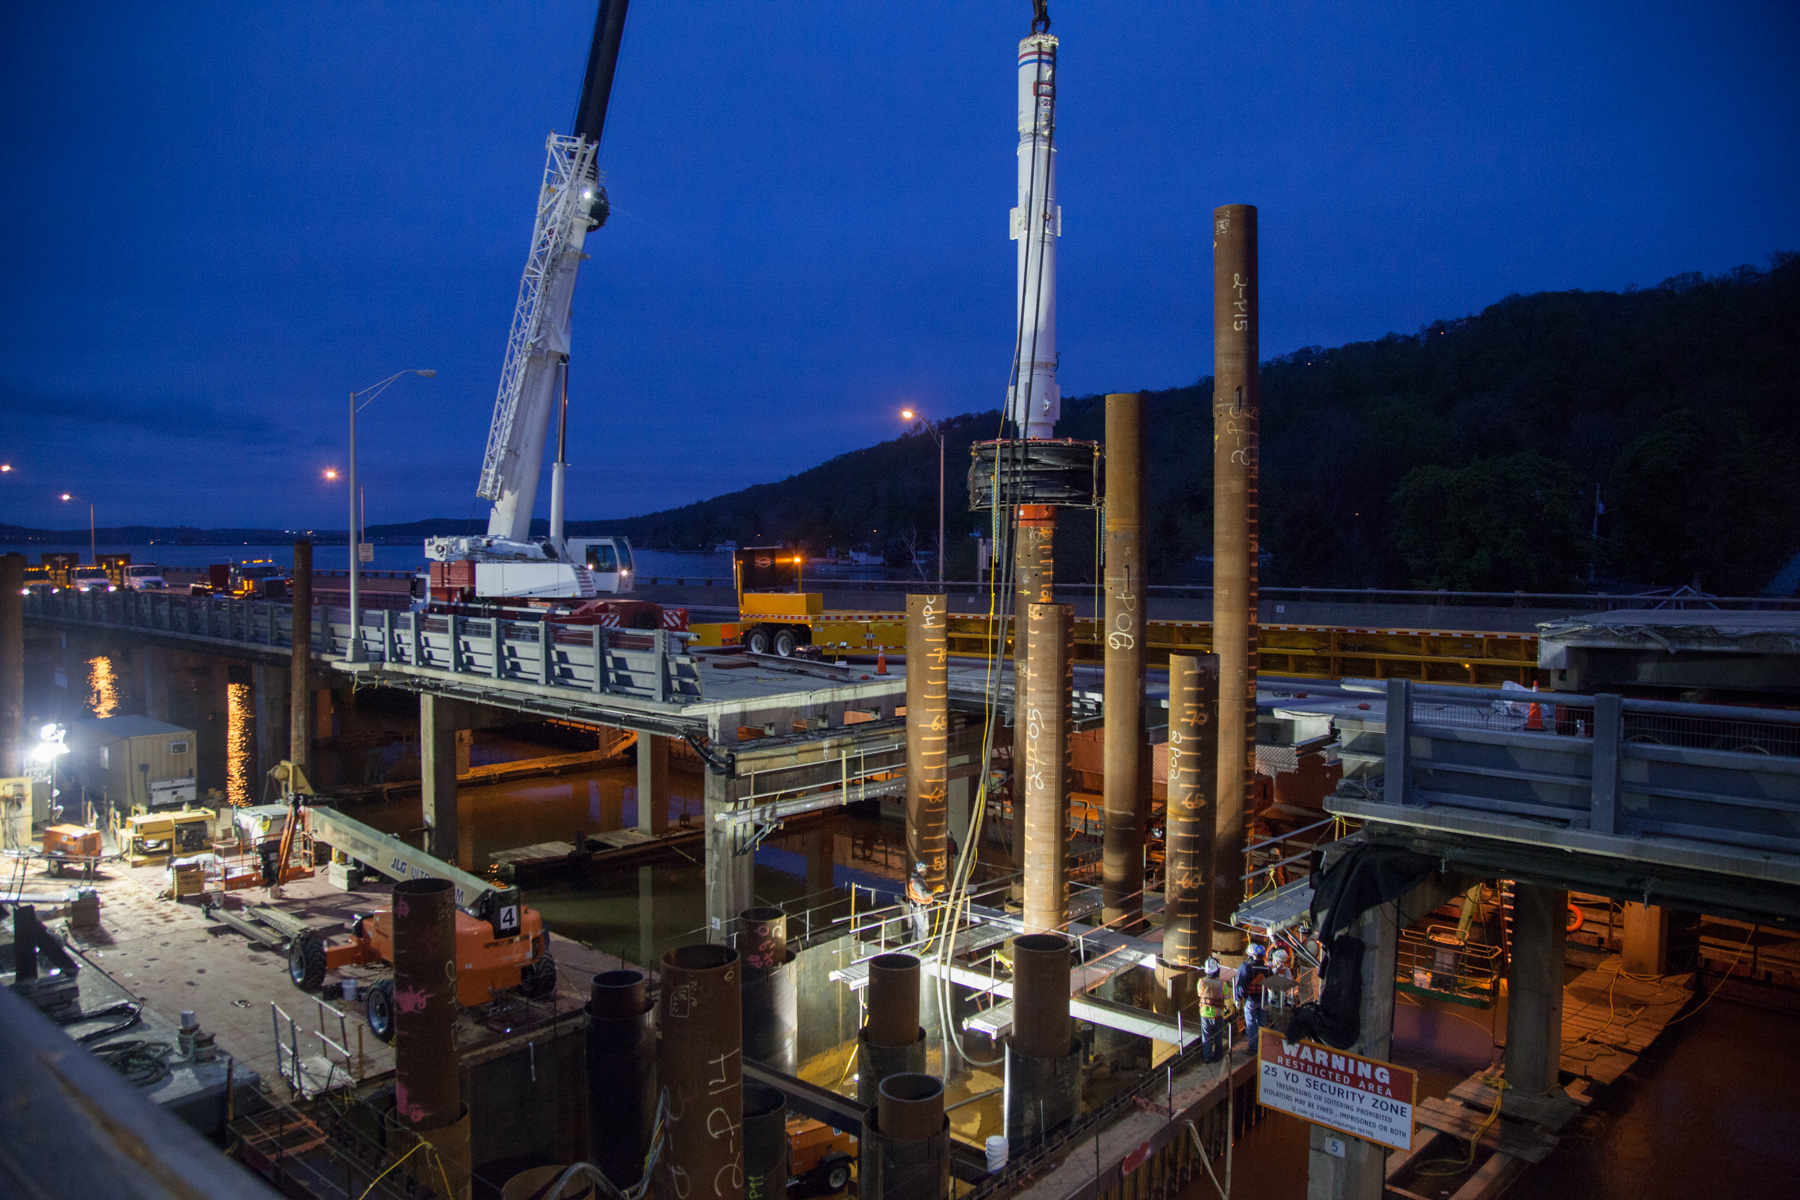 Foundations for one of the new bridge’s piers were successfully installed by temporarily removing portions of the existing bridge’s road deck.